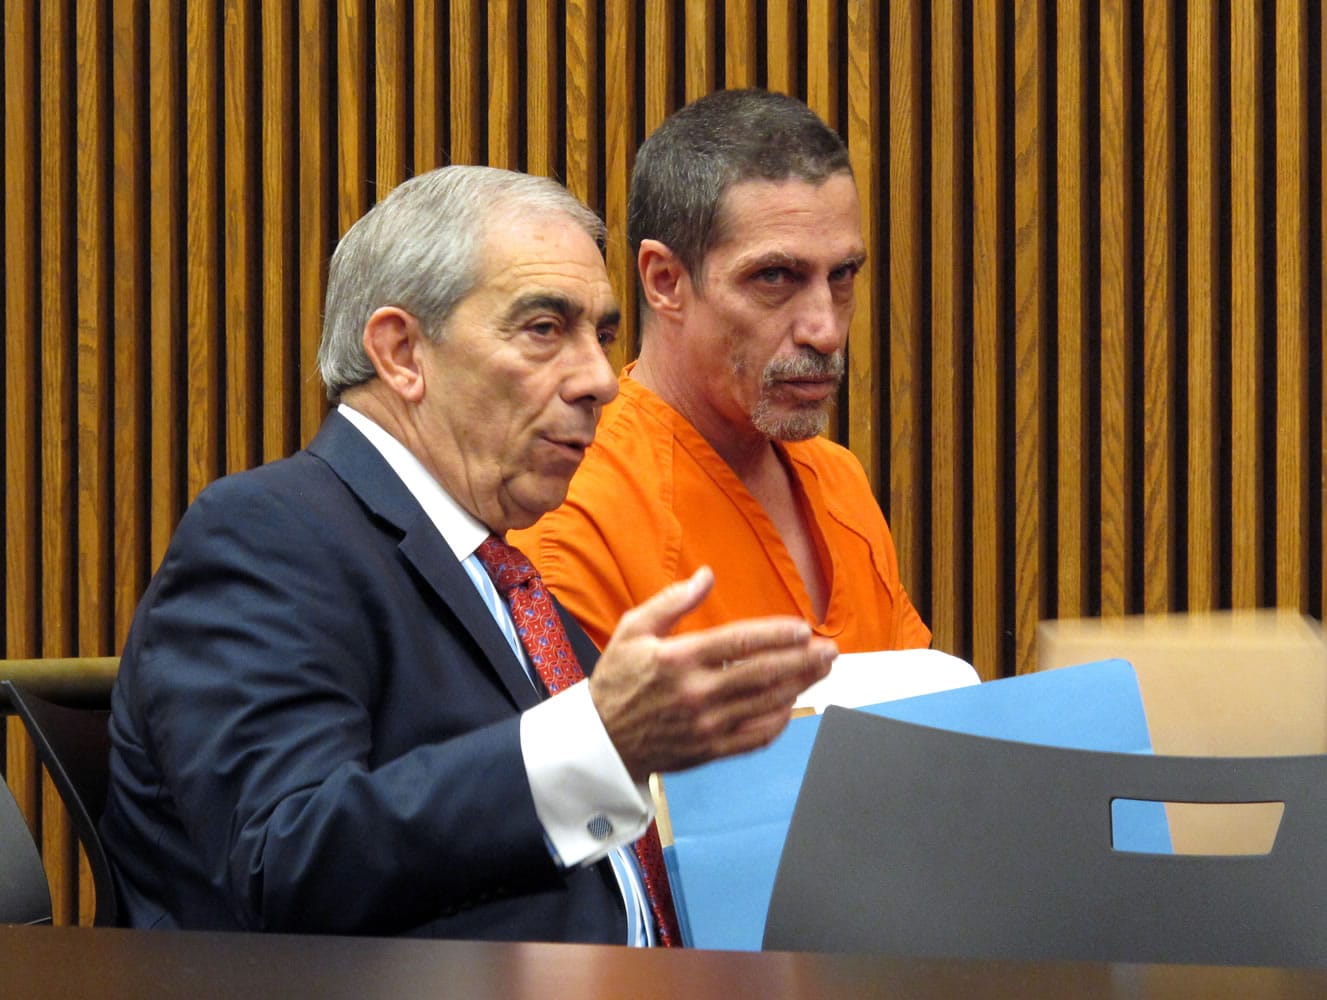 Bobby Hernandez, right, listens to defense attorney Ralph DeFranco in Cuyahoga County Common Pleas Court before pleading not guilty to kidnapping and other charges on Tuesday in Cleveland. Authorities allege Hernandez took his 5-year-old son from an Alabama home in 2002 and created a life for them in Ohio under new identities, a ruse discovered through discrepancies with the boy&#039;s Social Security number as he began the college application process.